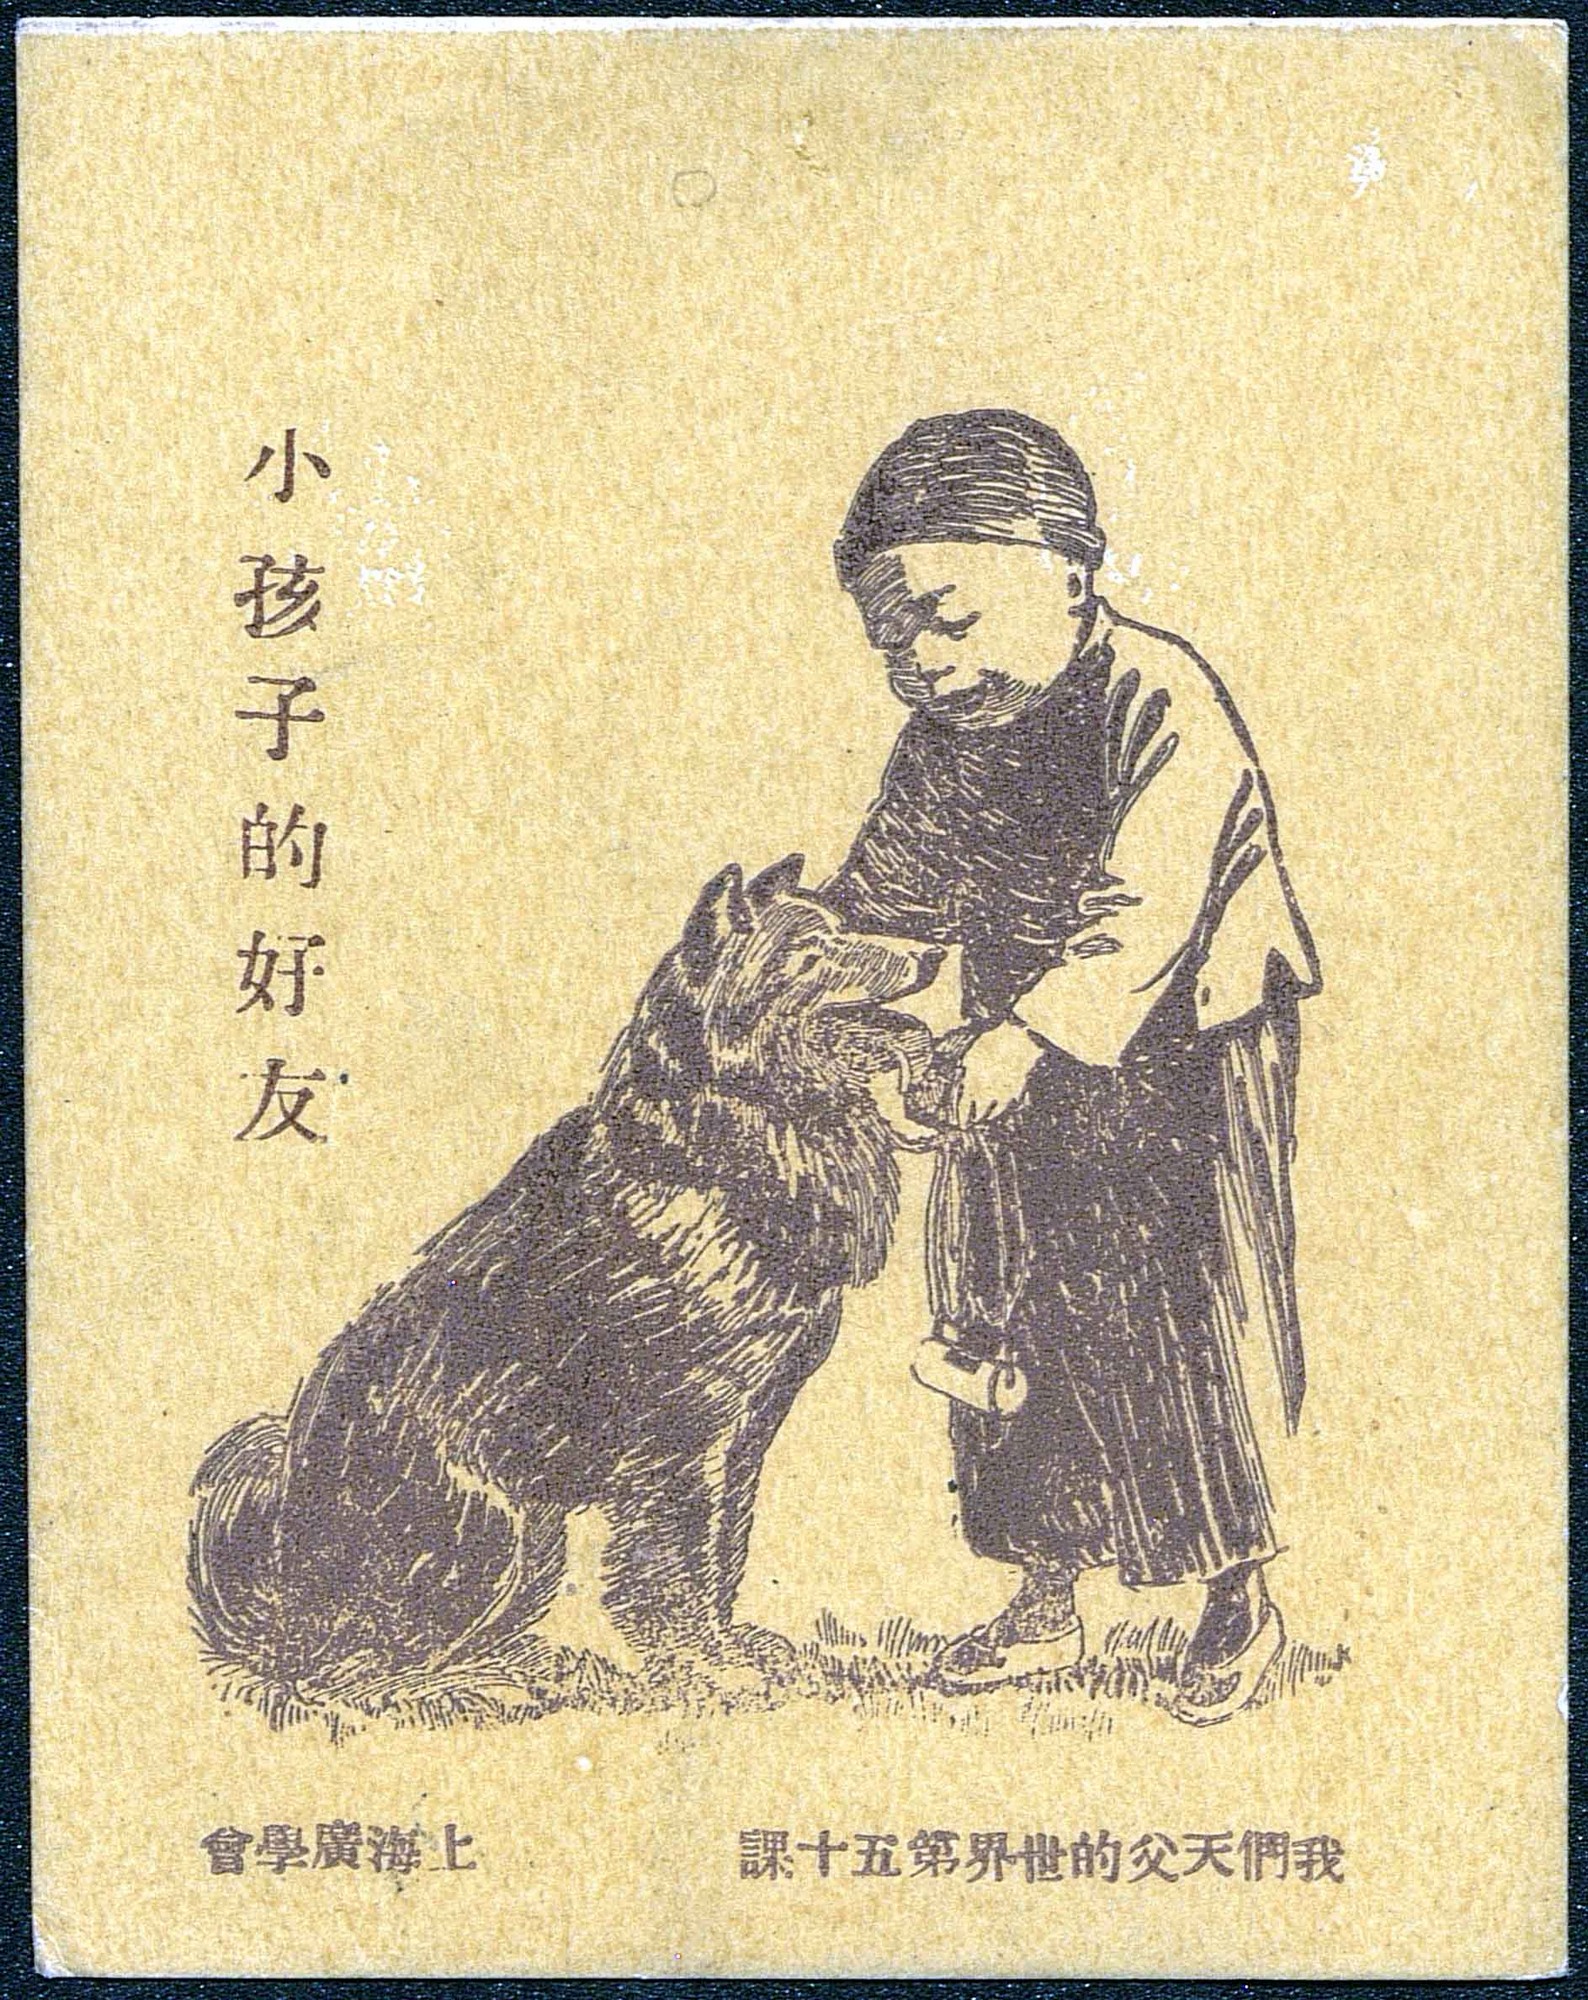 Poster of a young child with a dog